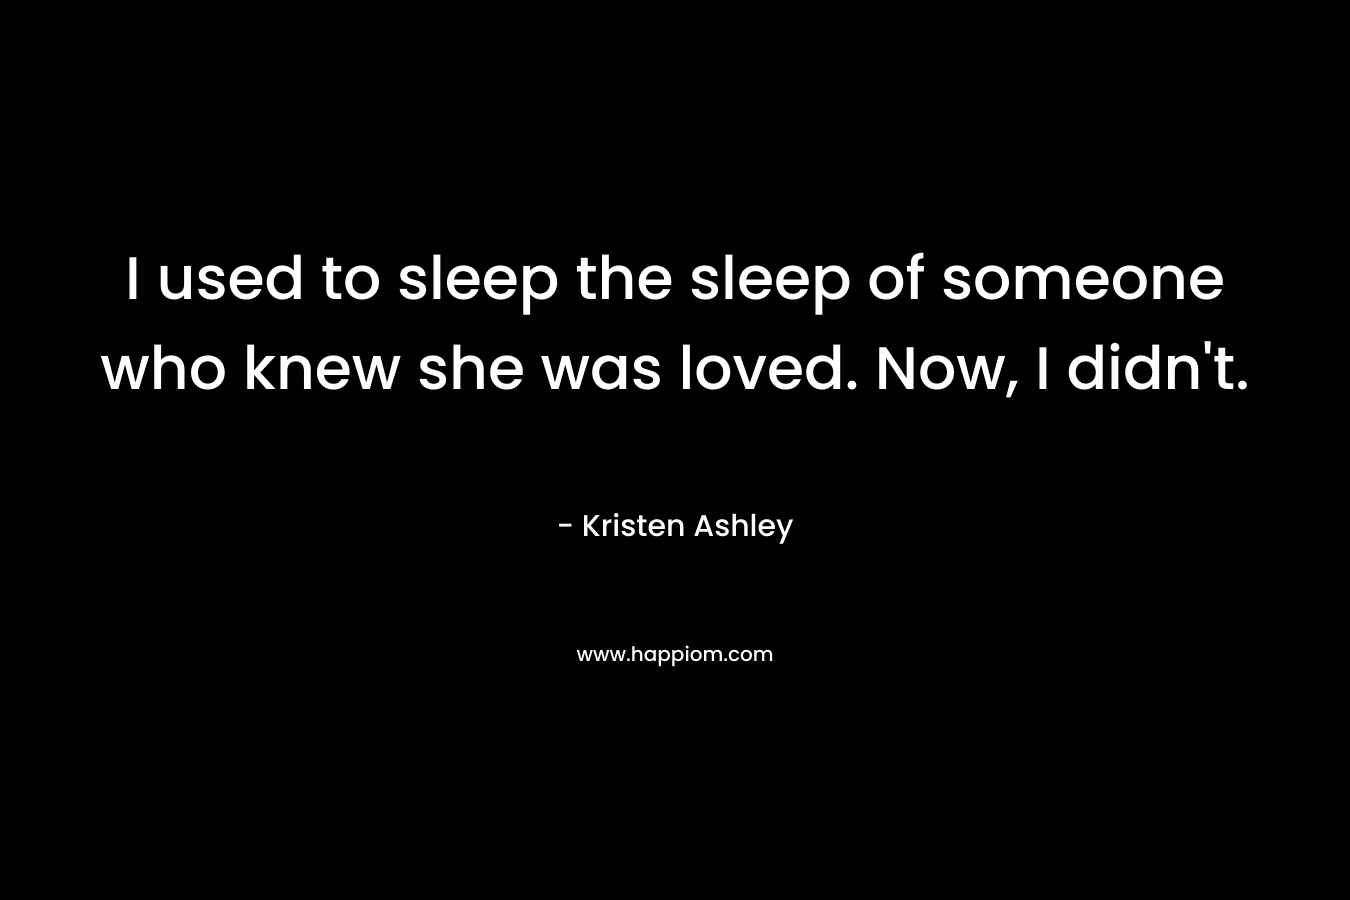 I used to sleep the sleep of someone who knew she was loved. Now, I didn't.